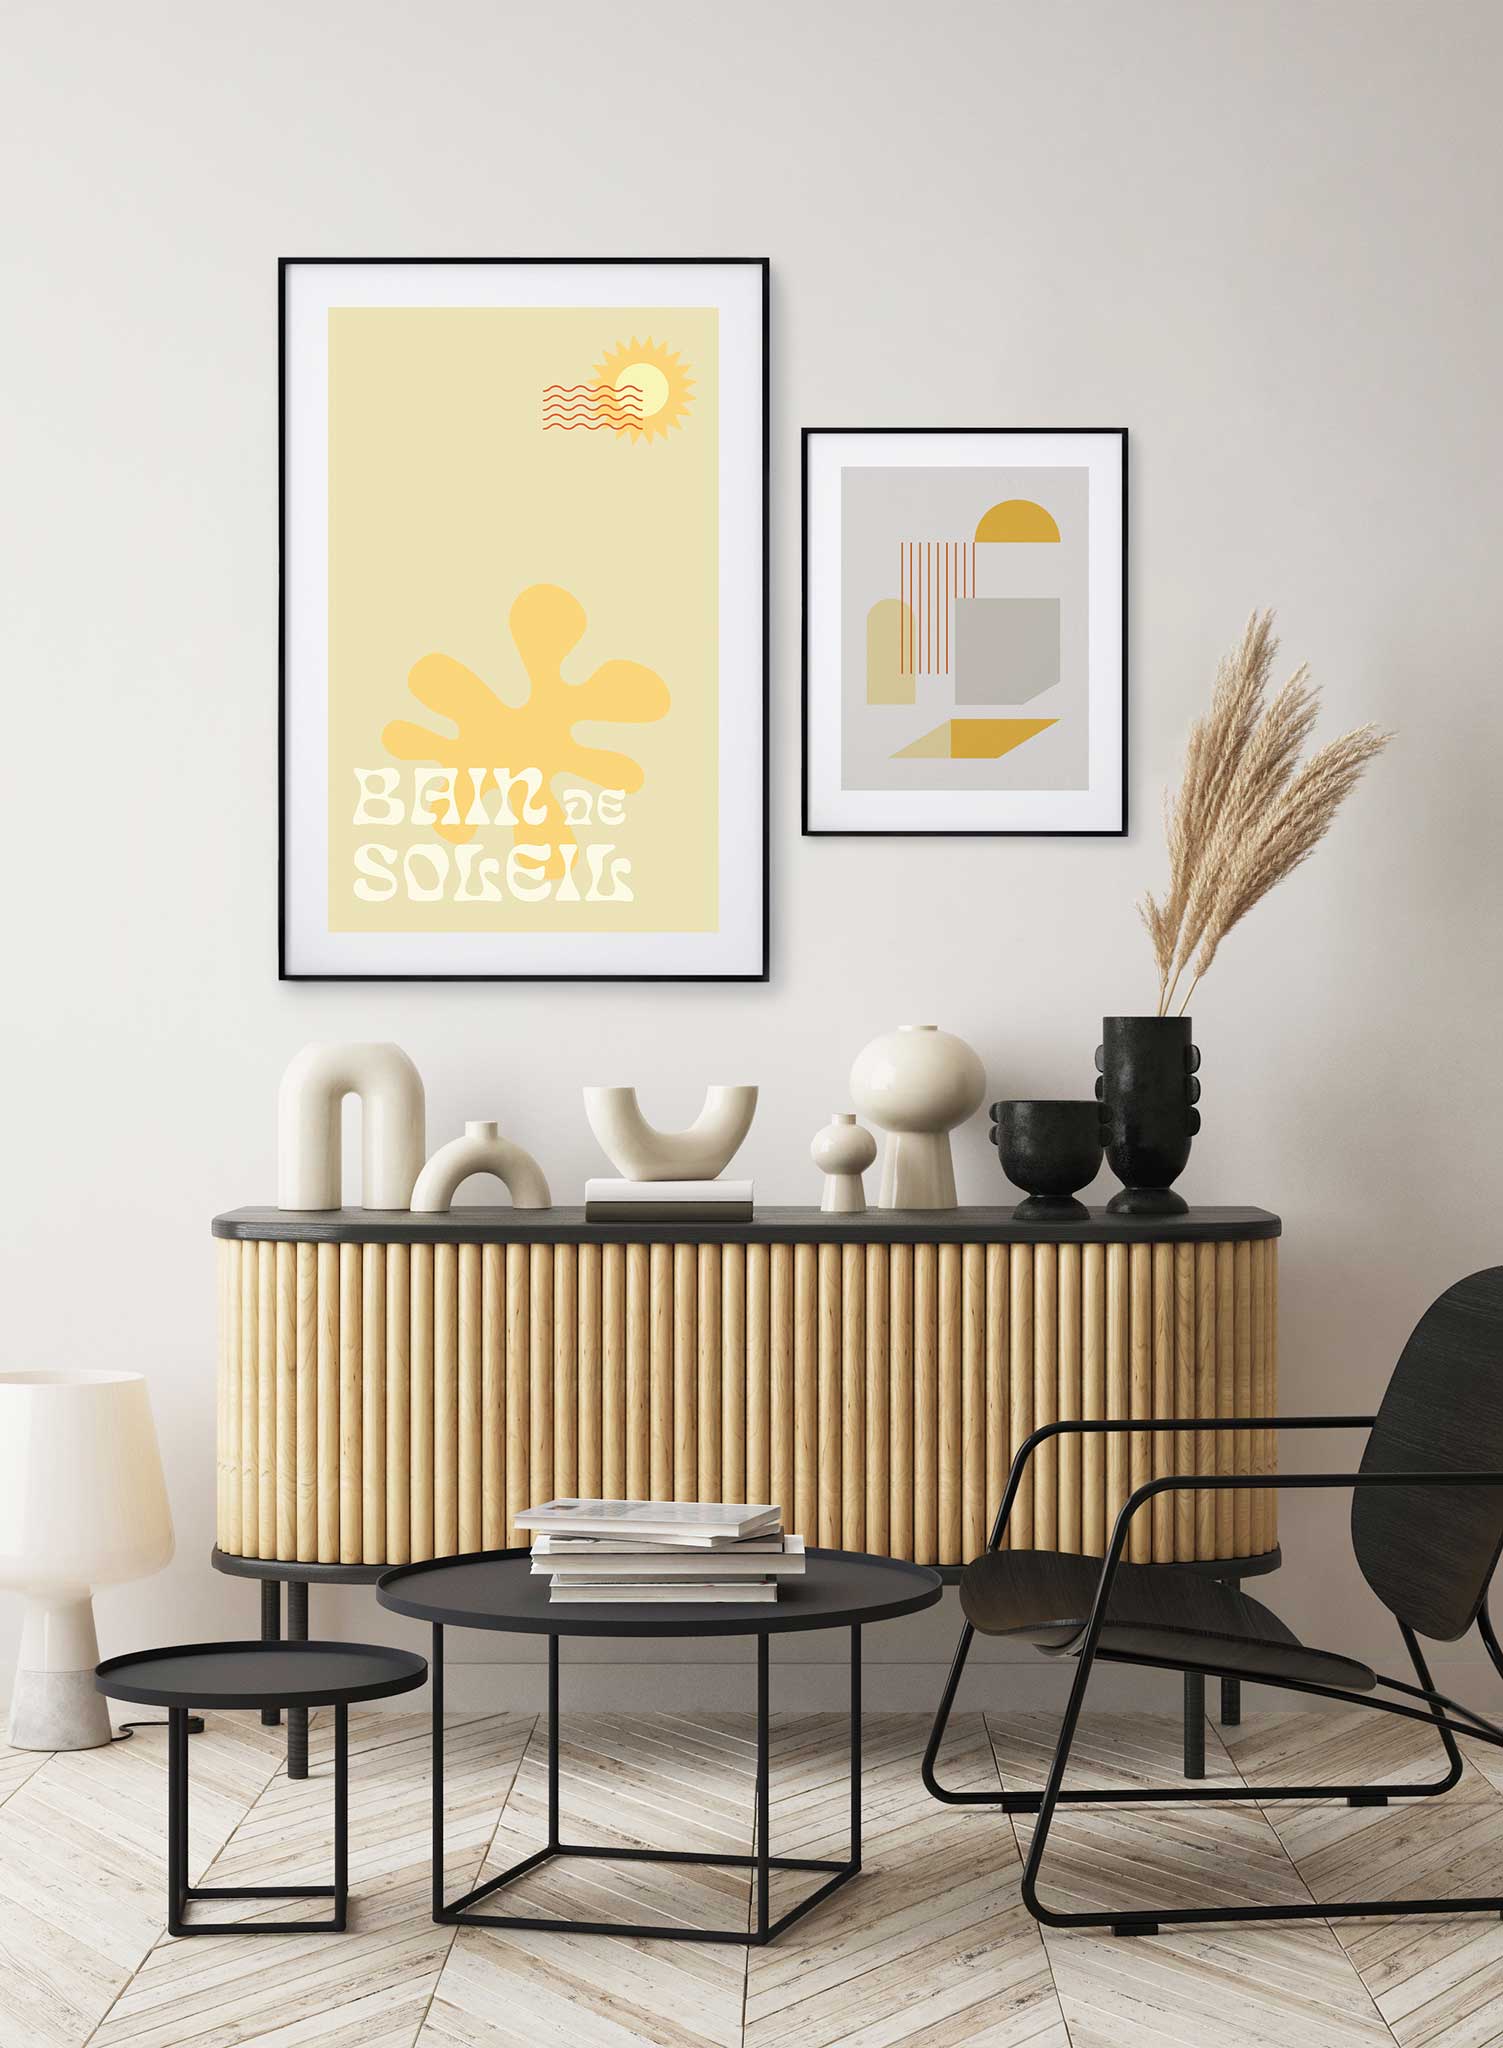 Greetings from Paradise is a vintage typography and illustration poster of a yellow retro postcard by Opposite Wall.